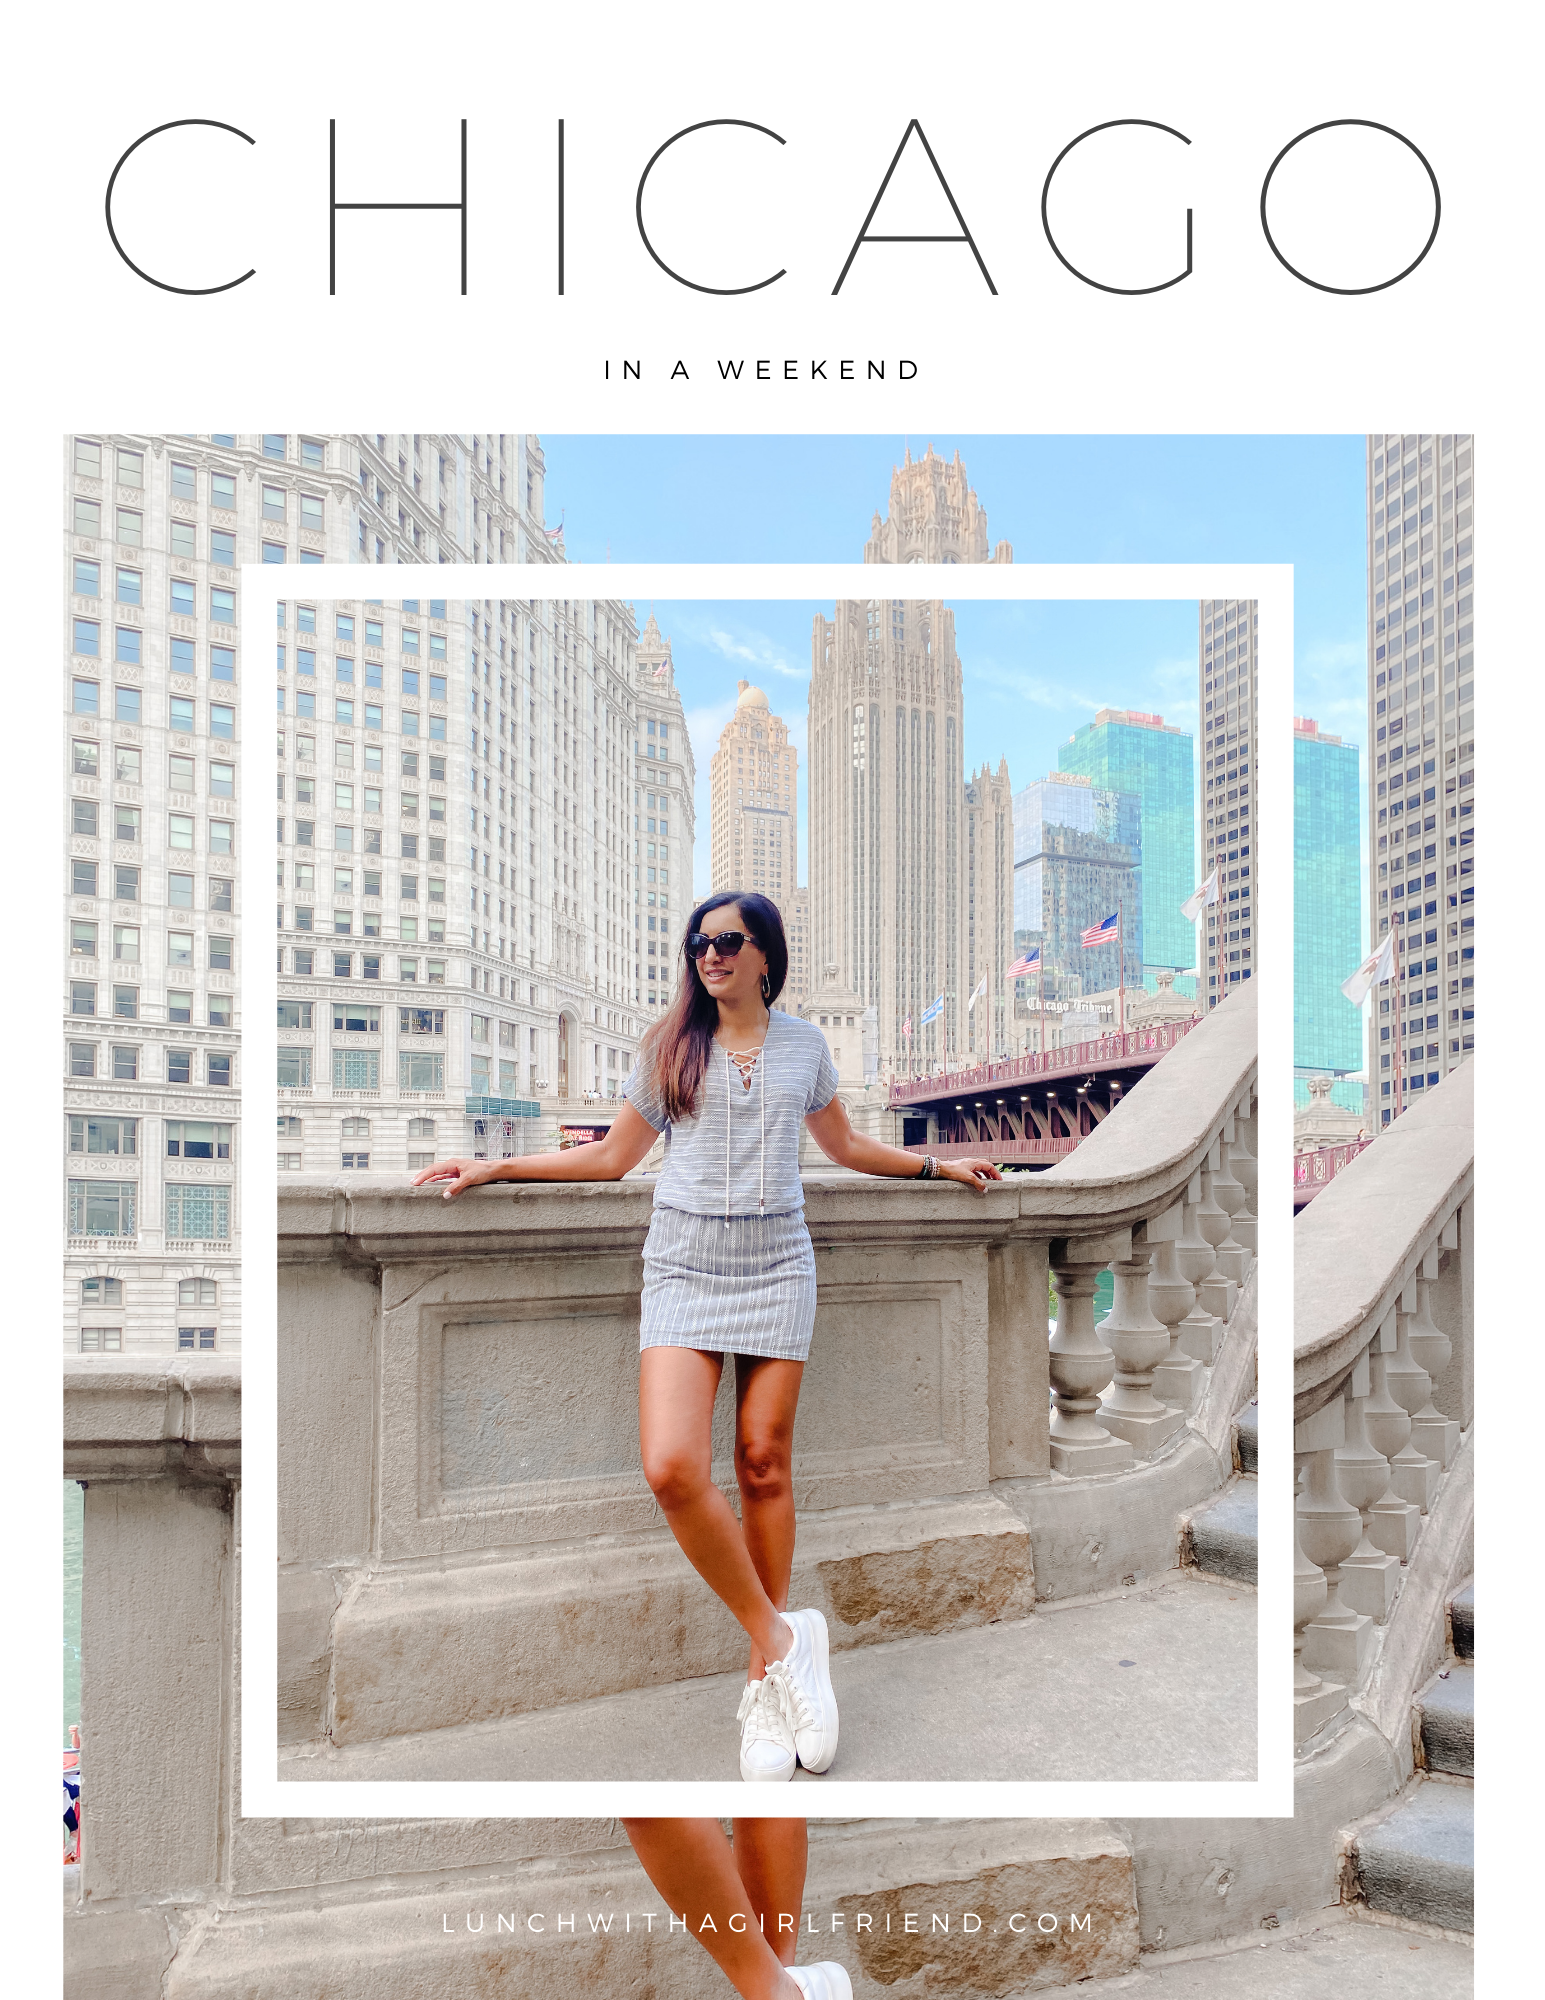 What To Do In A Weekend In Chicago